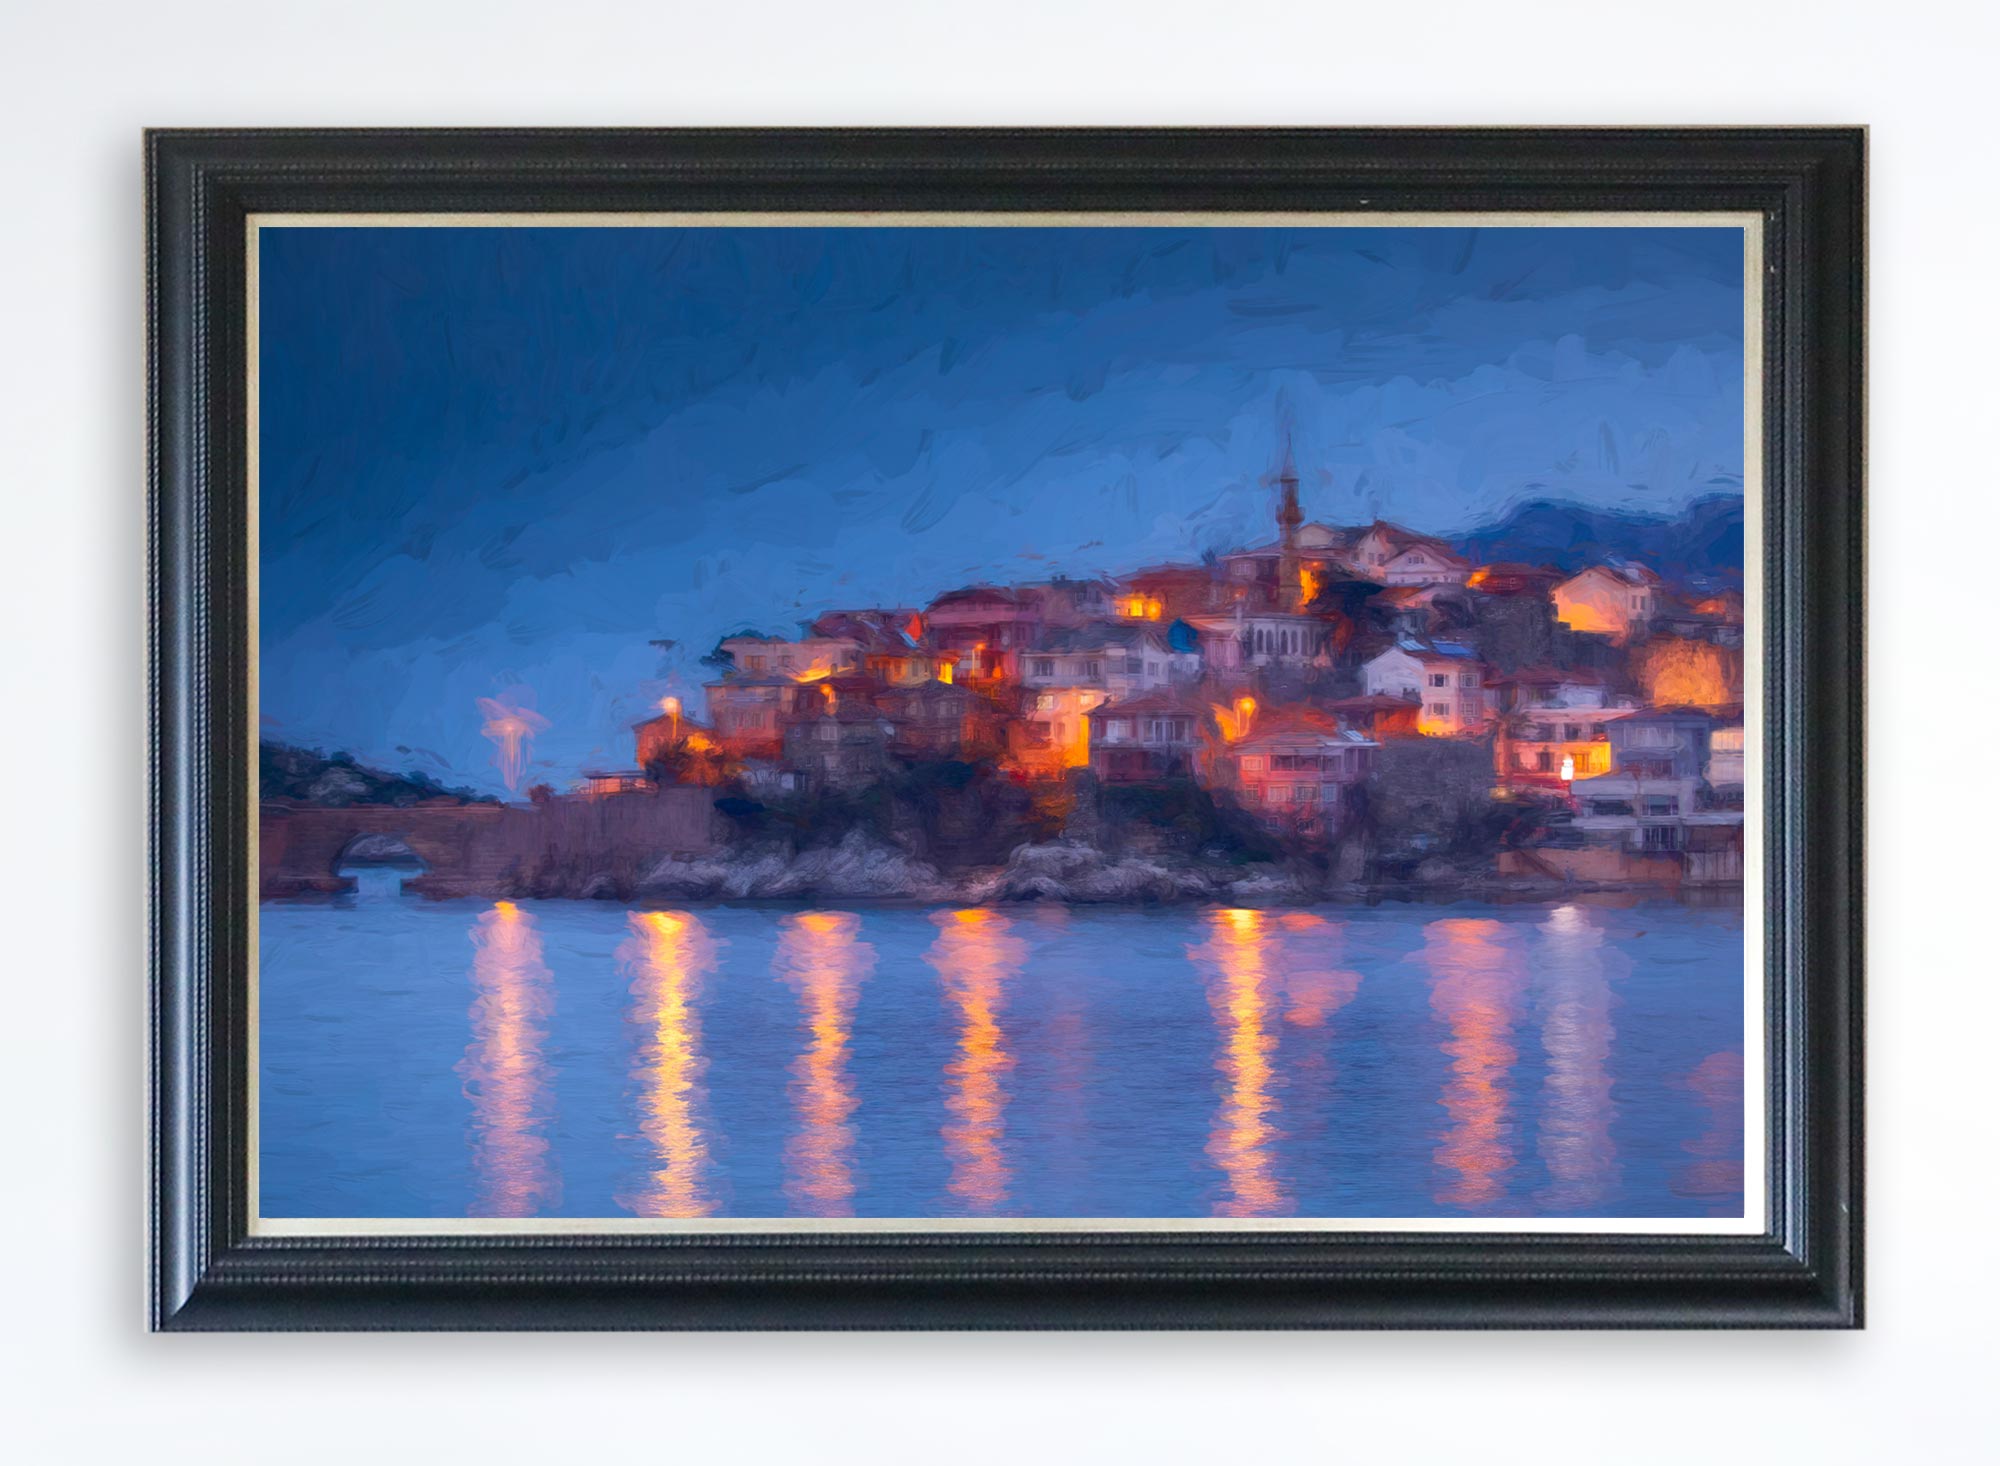 Black Sea Village at Night Canvas Print (Frame not Included)